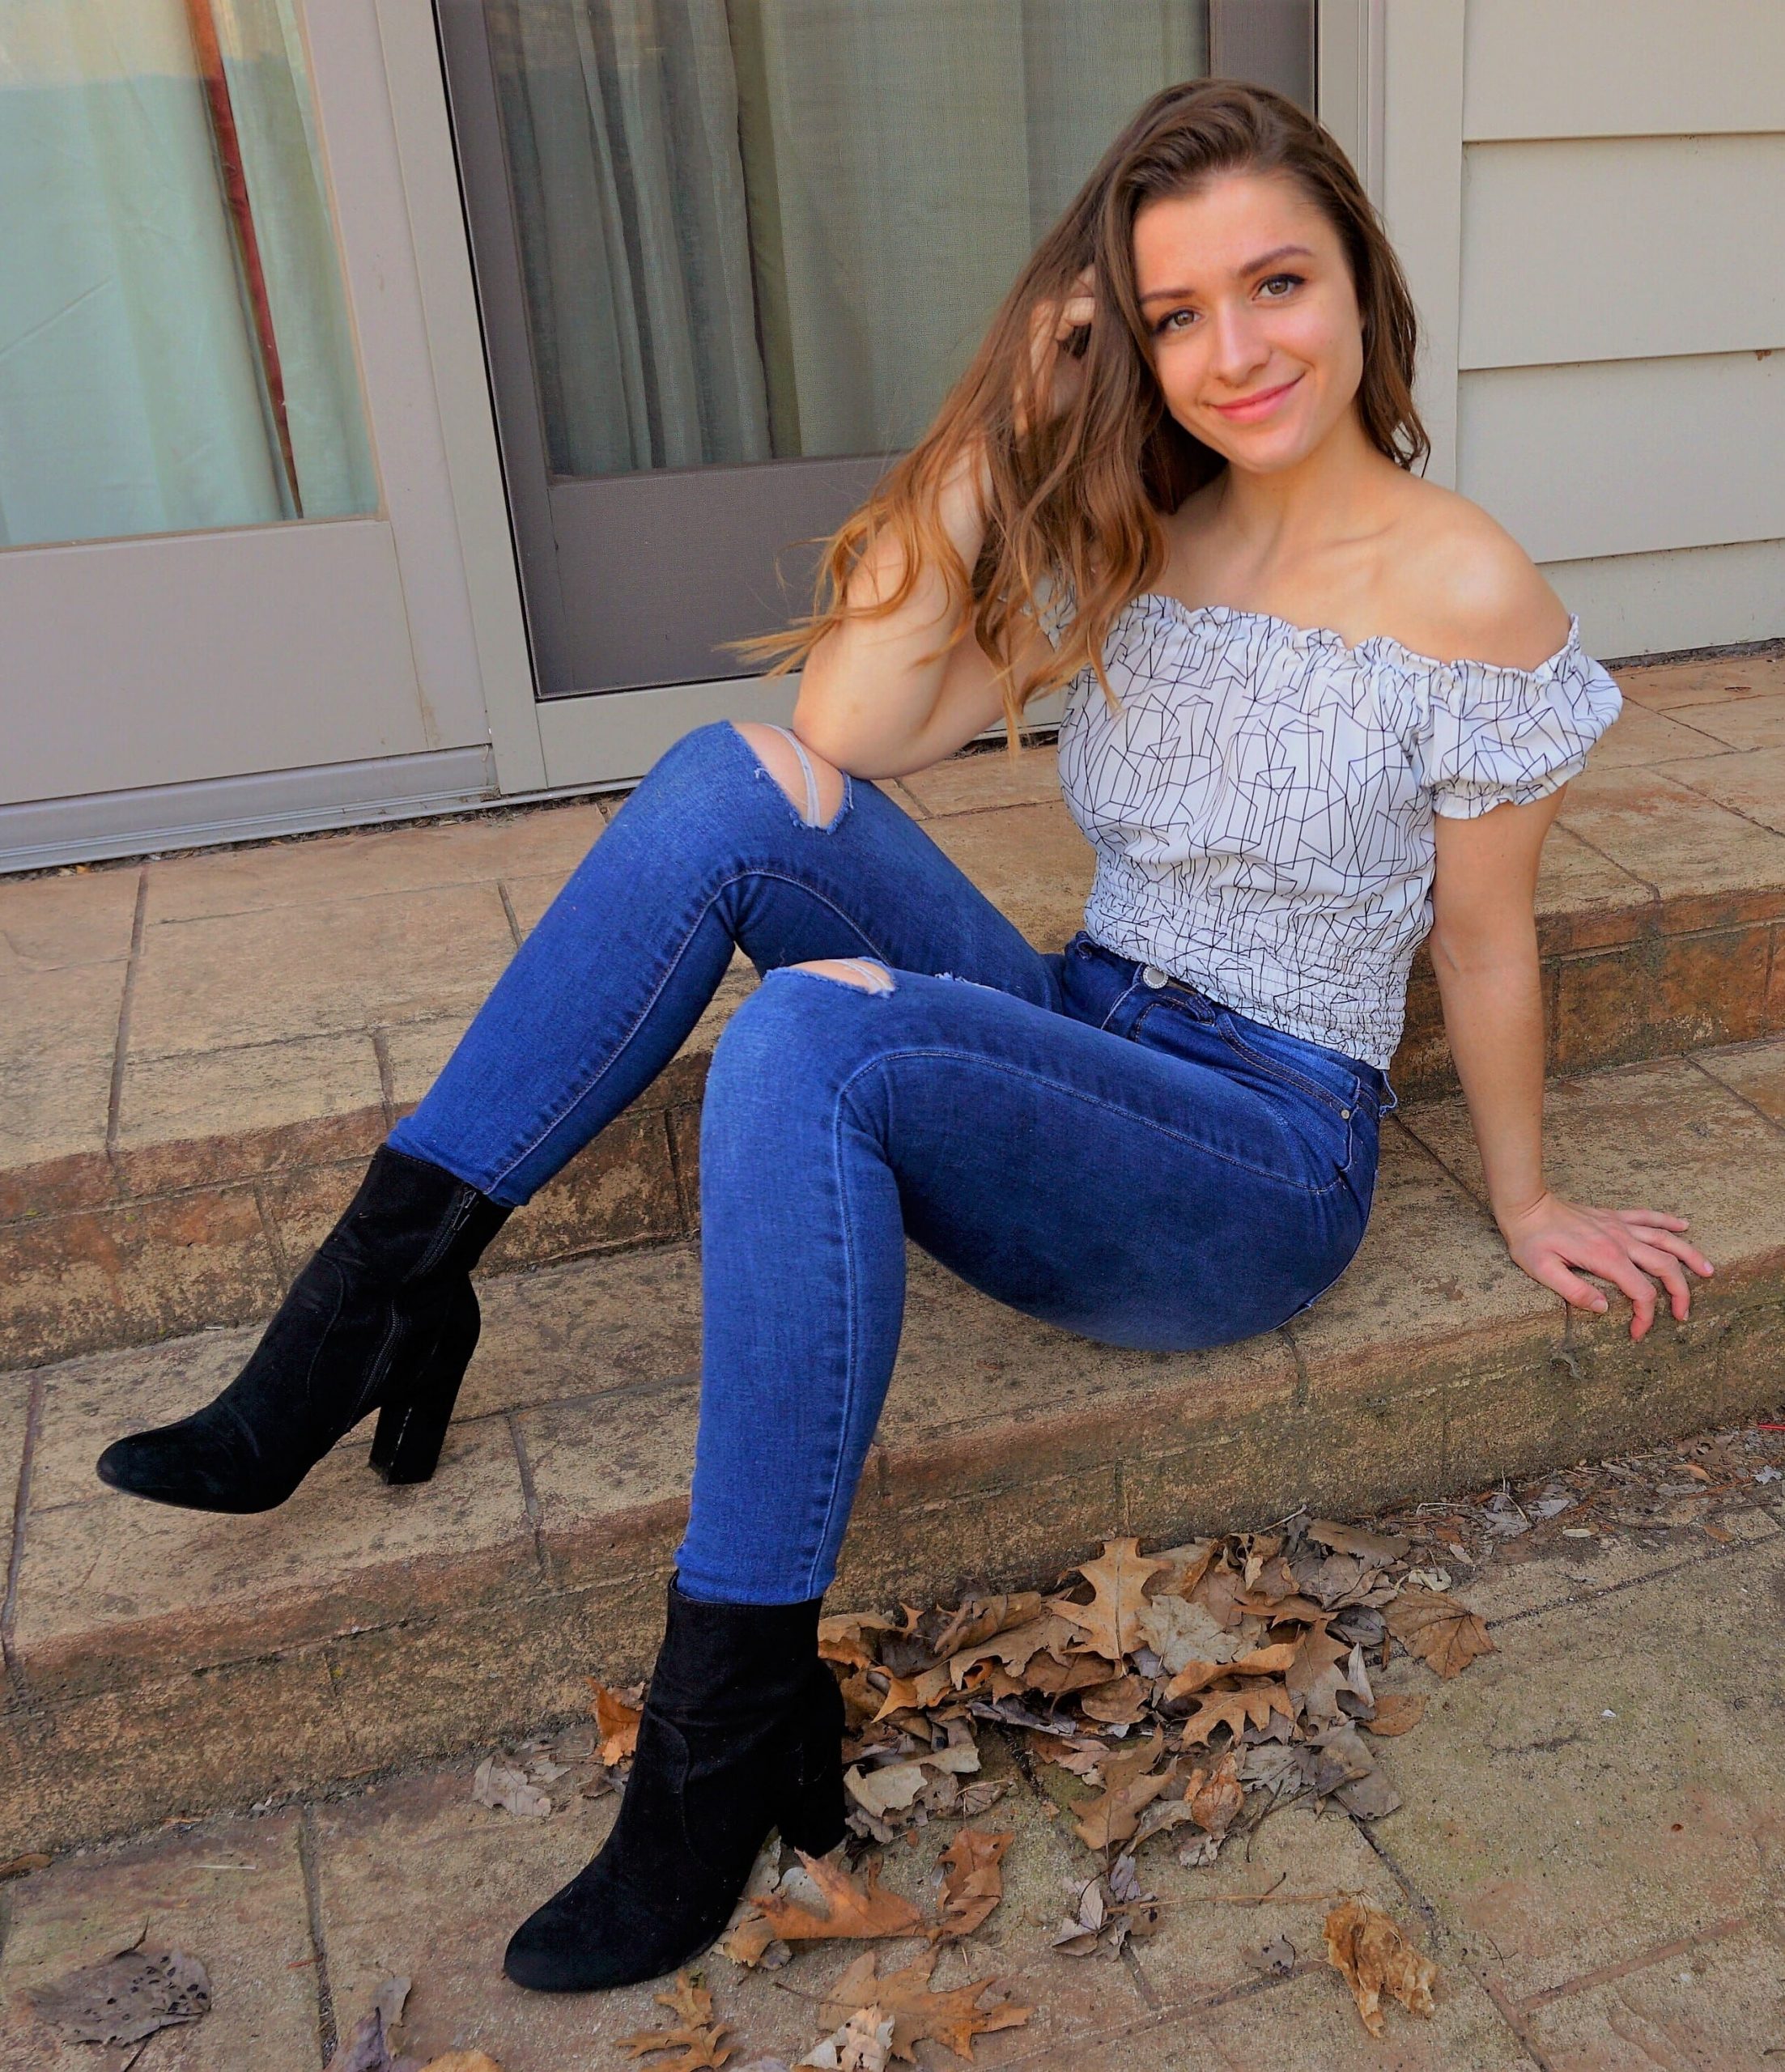 woman sitting on step and wearing off shoulder top and jeans